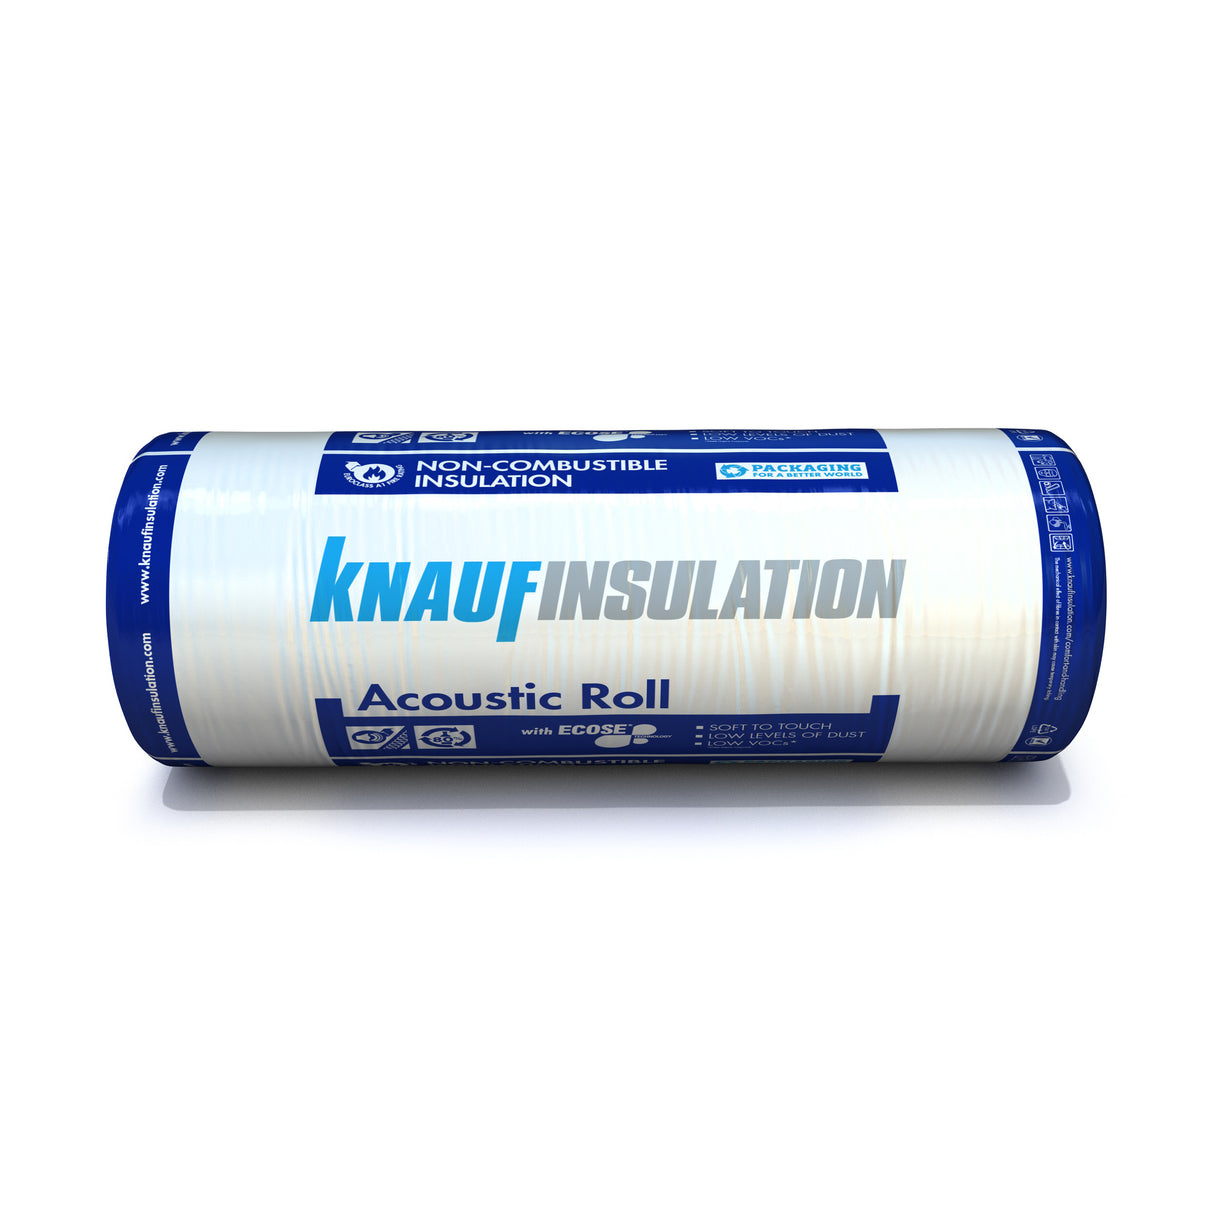 25mm Knauf Acoustic Roll (APR) Glass Mineral Wool Insulation - 26.64m²